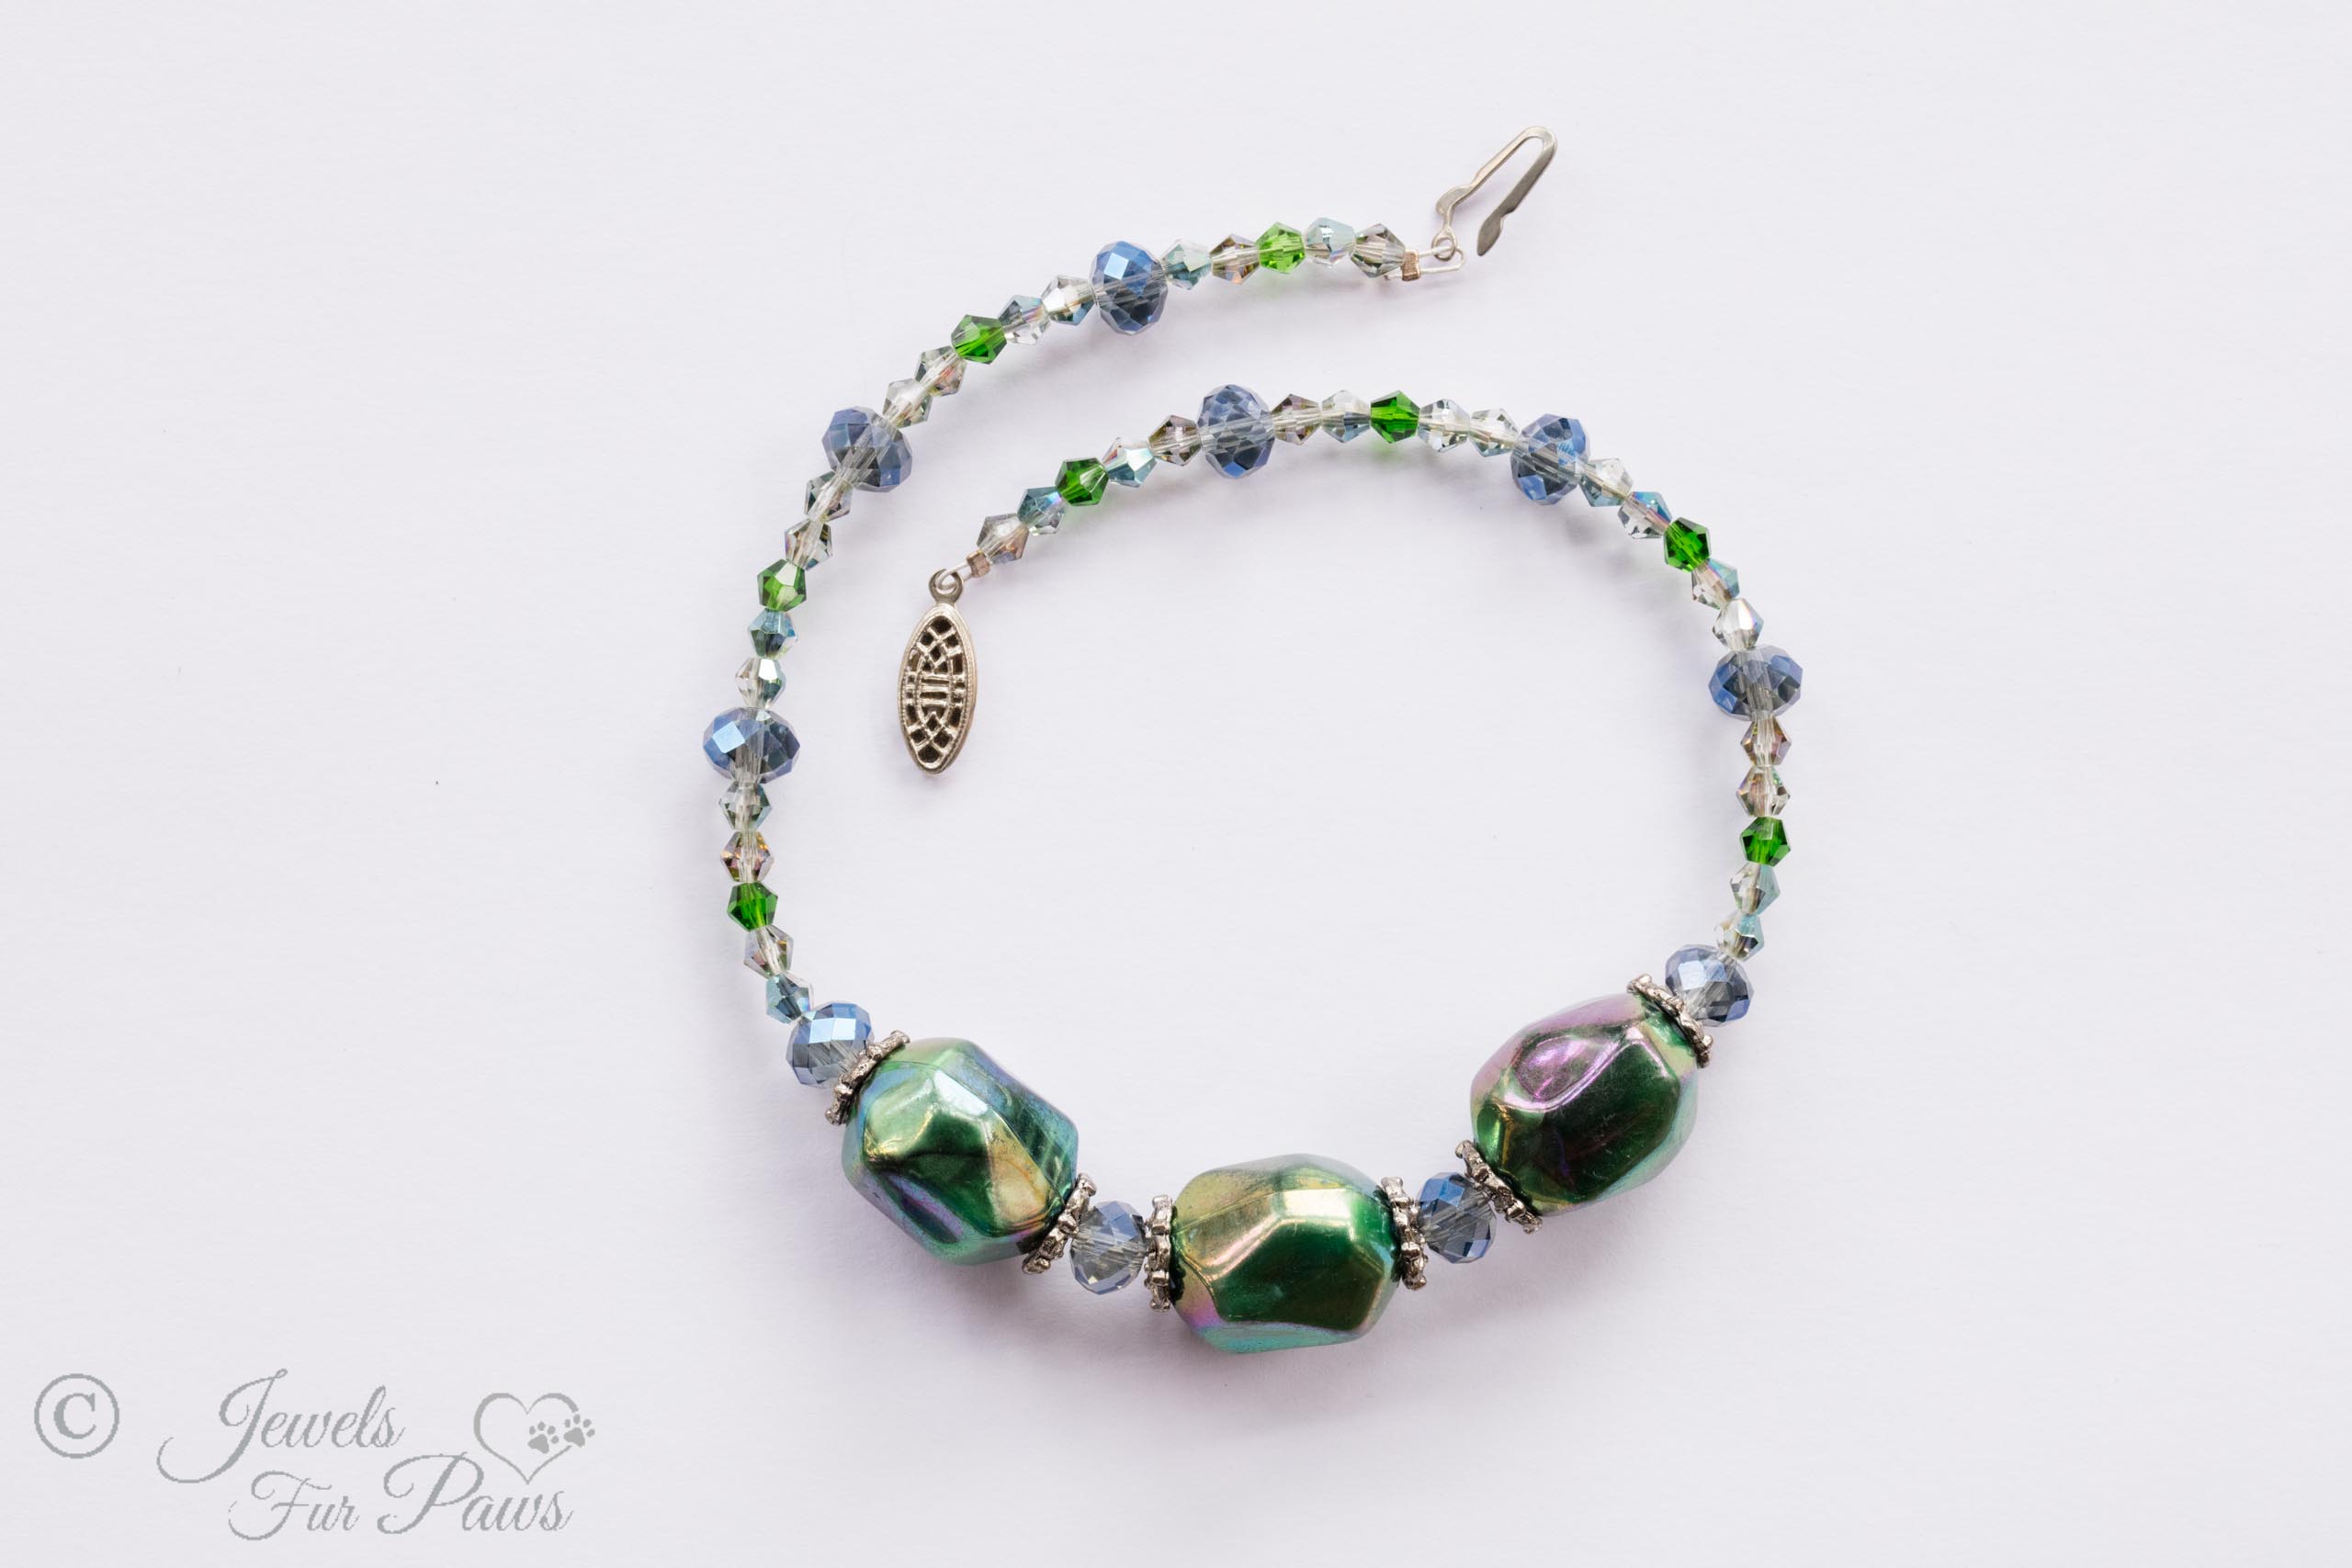 three iridescent green baubles strung with shades of green and blue faceted Czech crystals on a white background